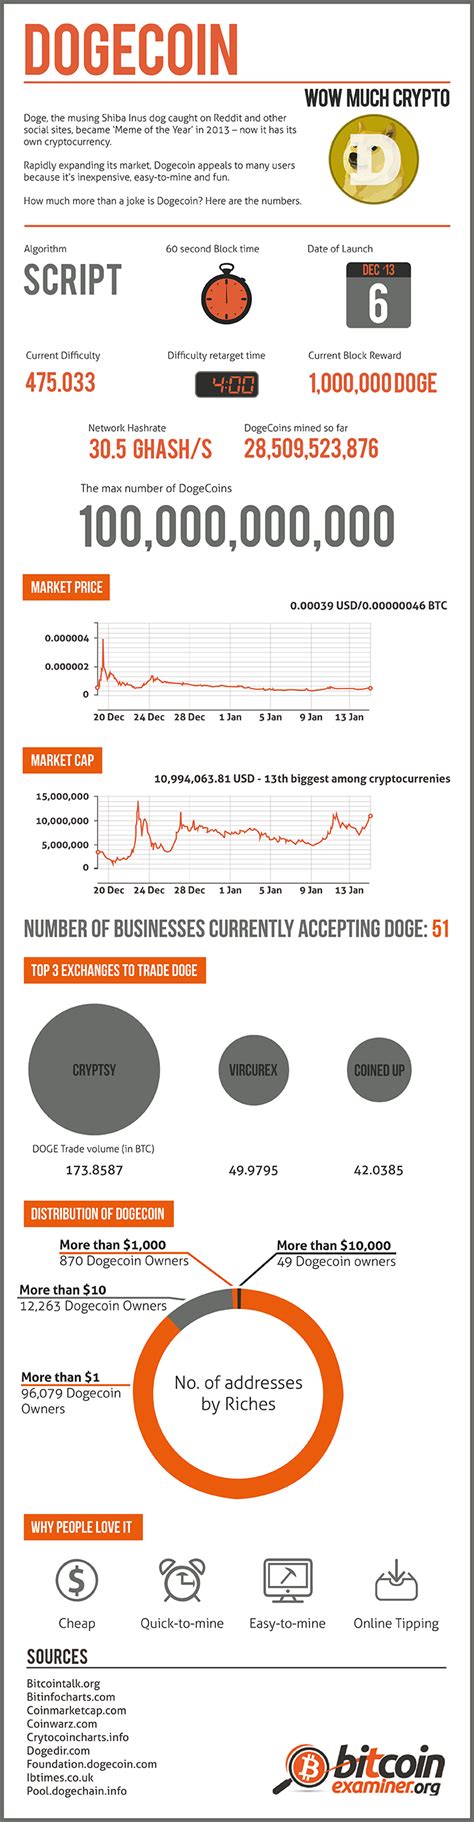 Dogecoin cryptocurrency appeared in 2013 as a joke. What is Up With Dogecoin? Infographic - Business 2 Community